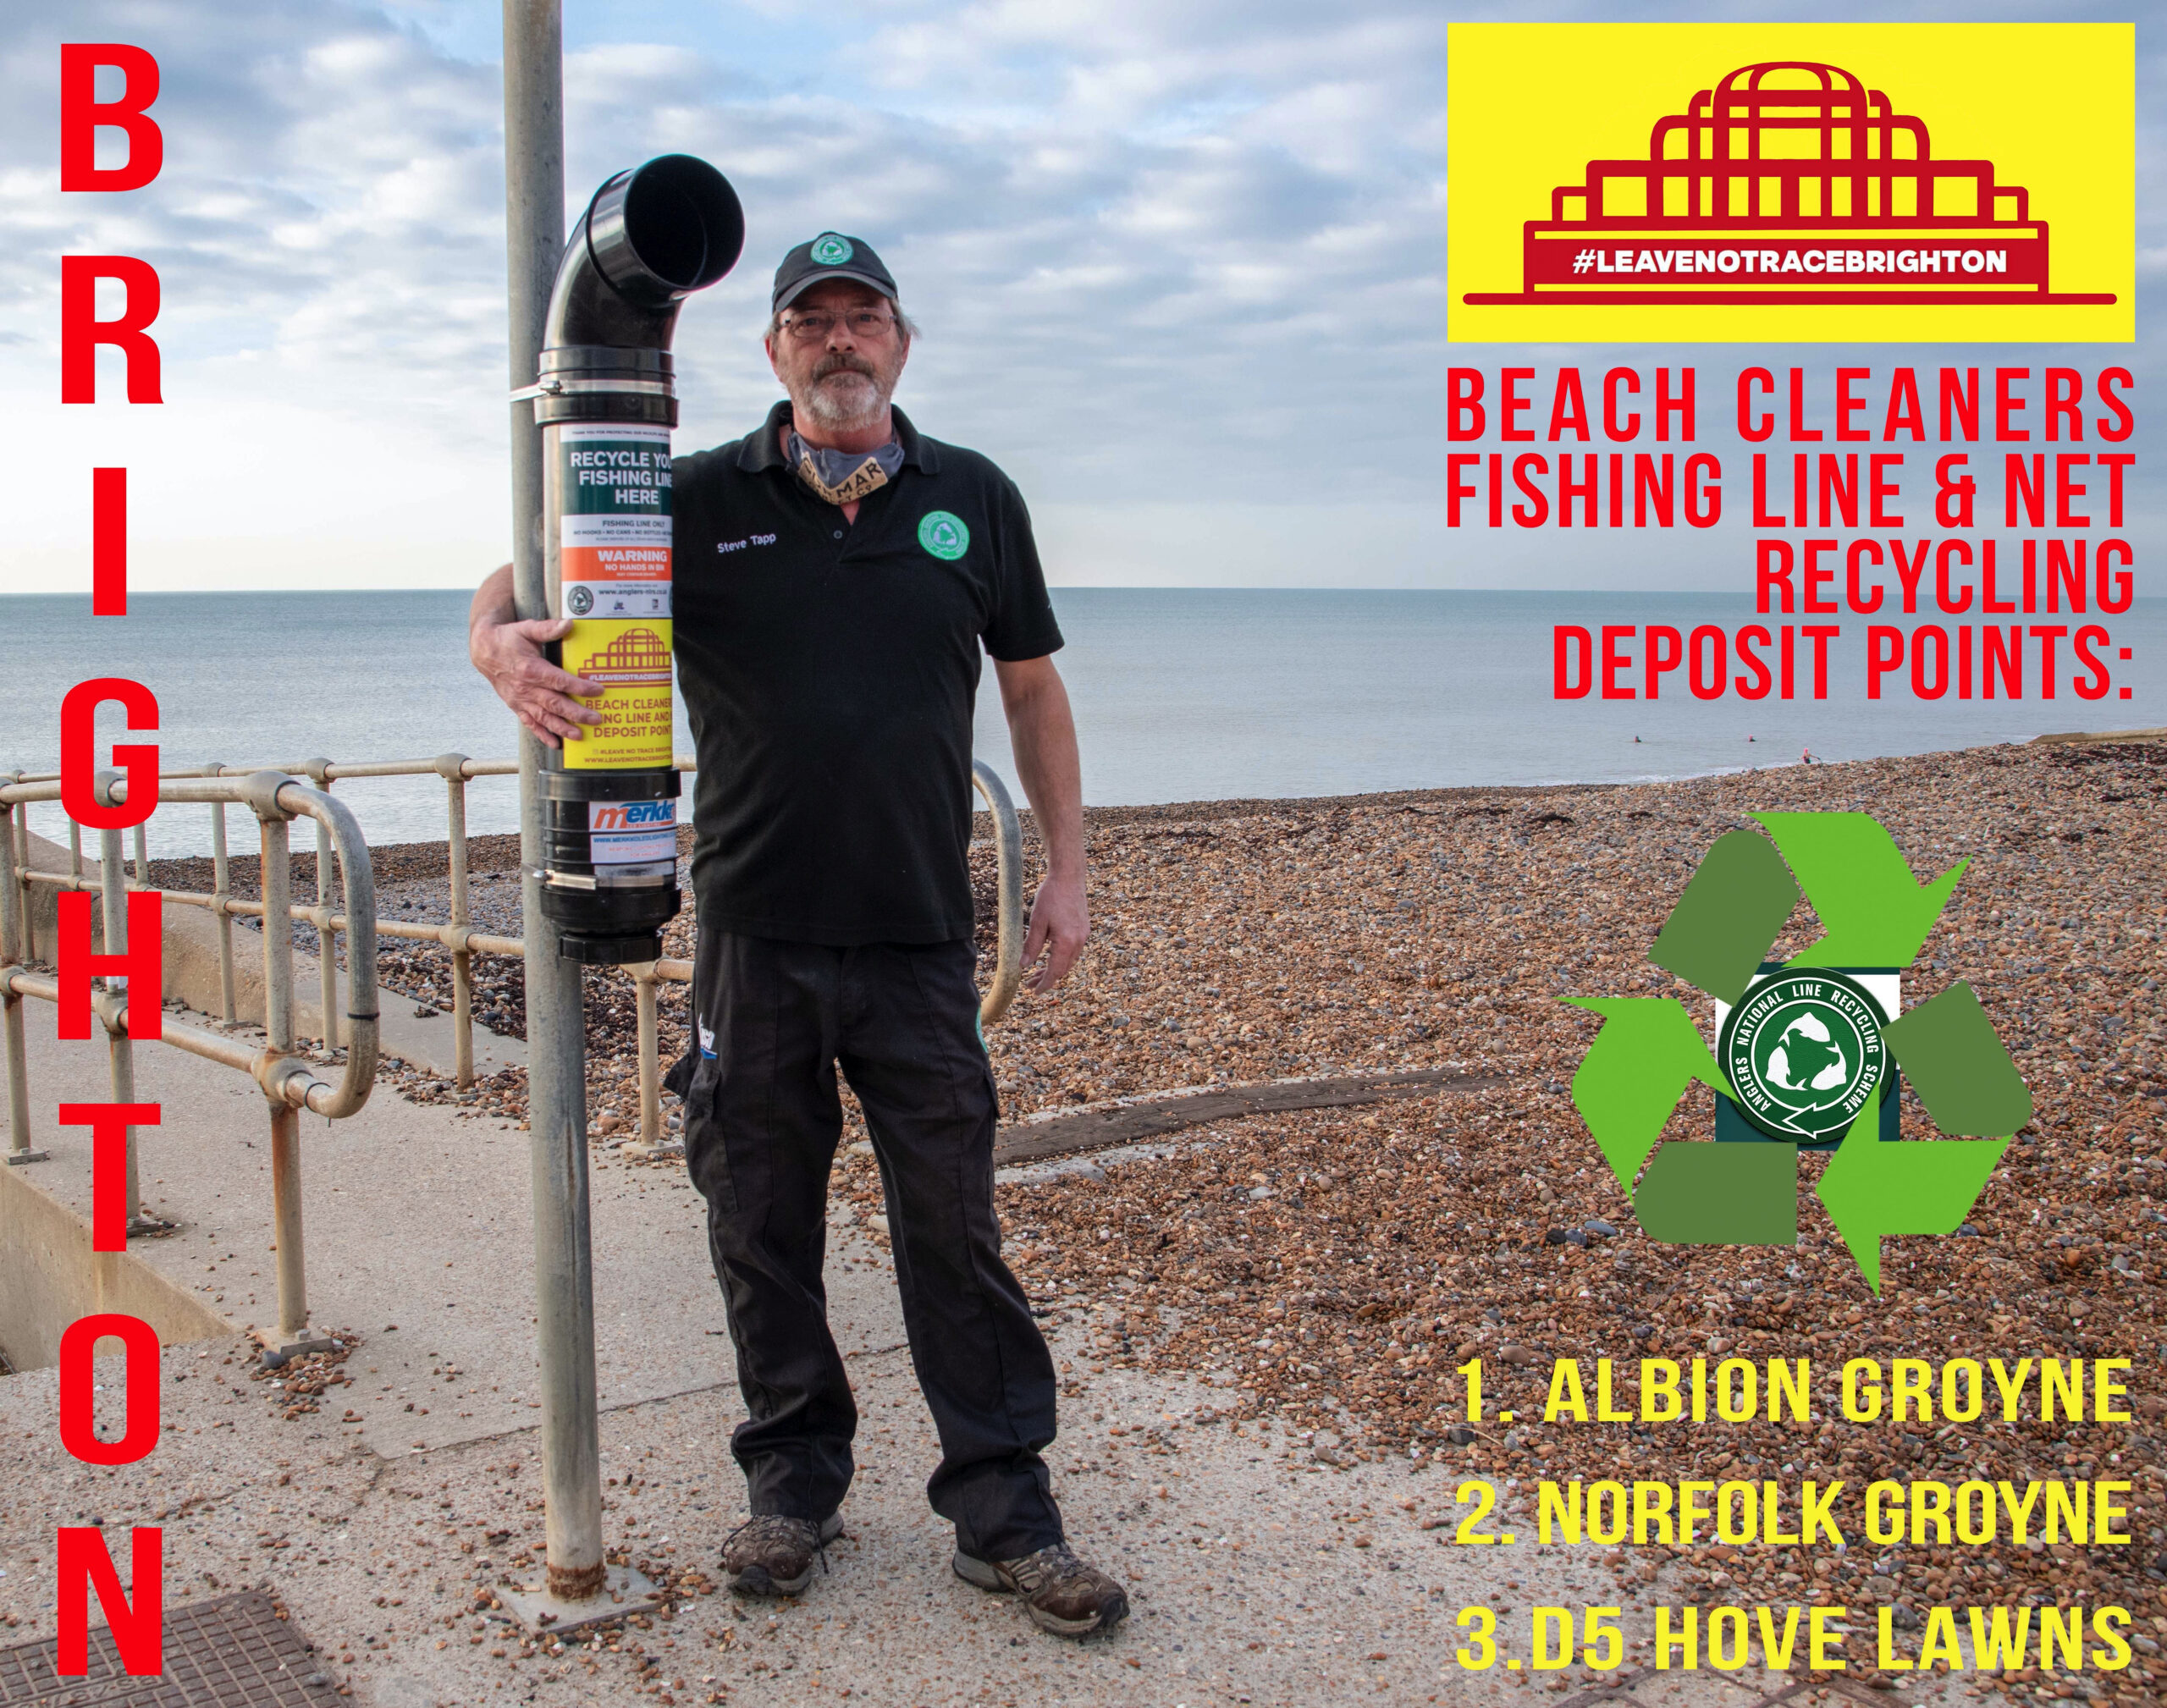 #LEAVE NO TRACE BRIGHTON BRING FISHING LINE AND NET RECYCLING DEPOSIT TUBES TO BRIGHTON SEAFRONT.